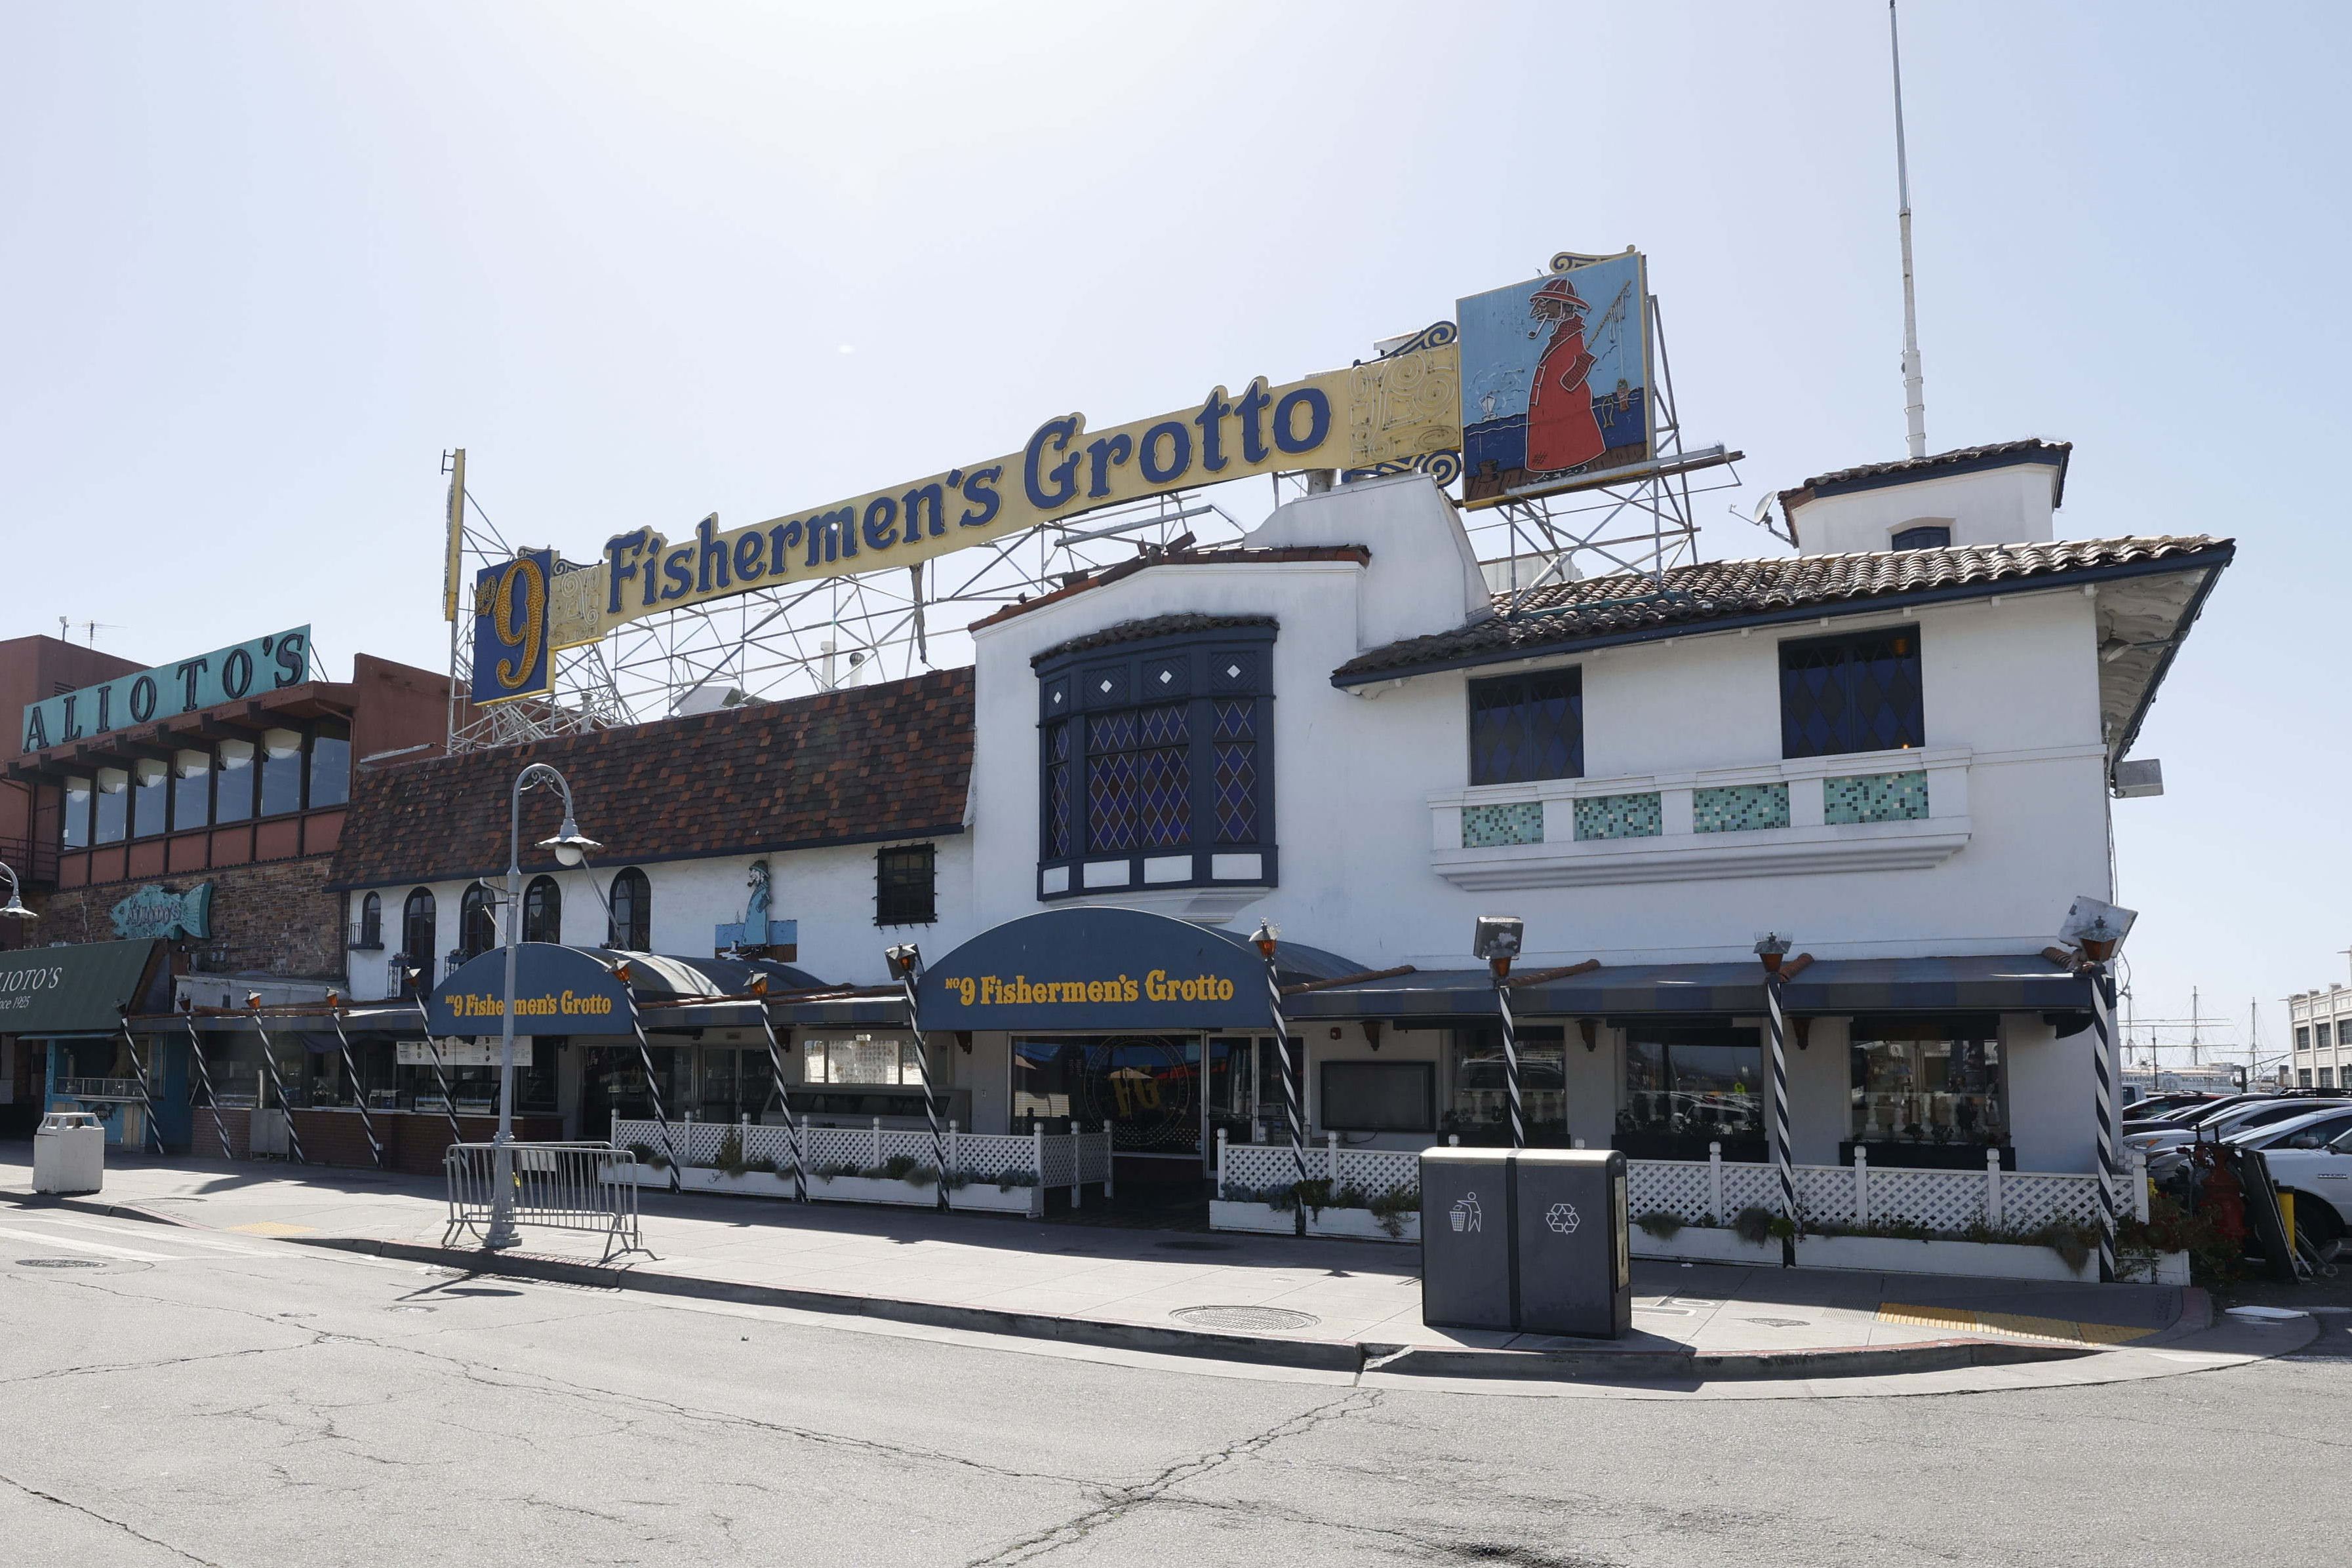 San Francisco Sues To Evict Iconic Fisherman’s Wharf Restaurants for $1.4M Back Rent